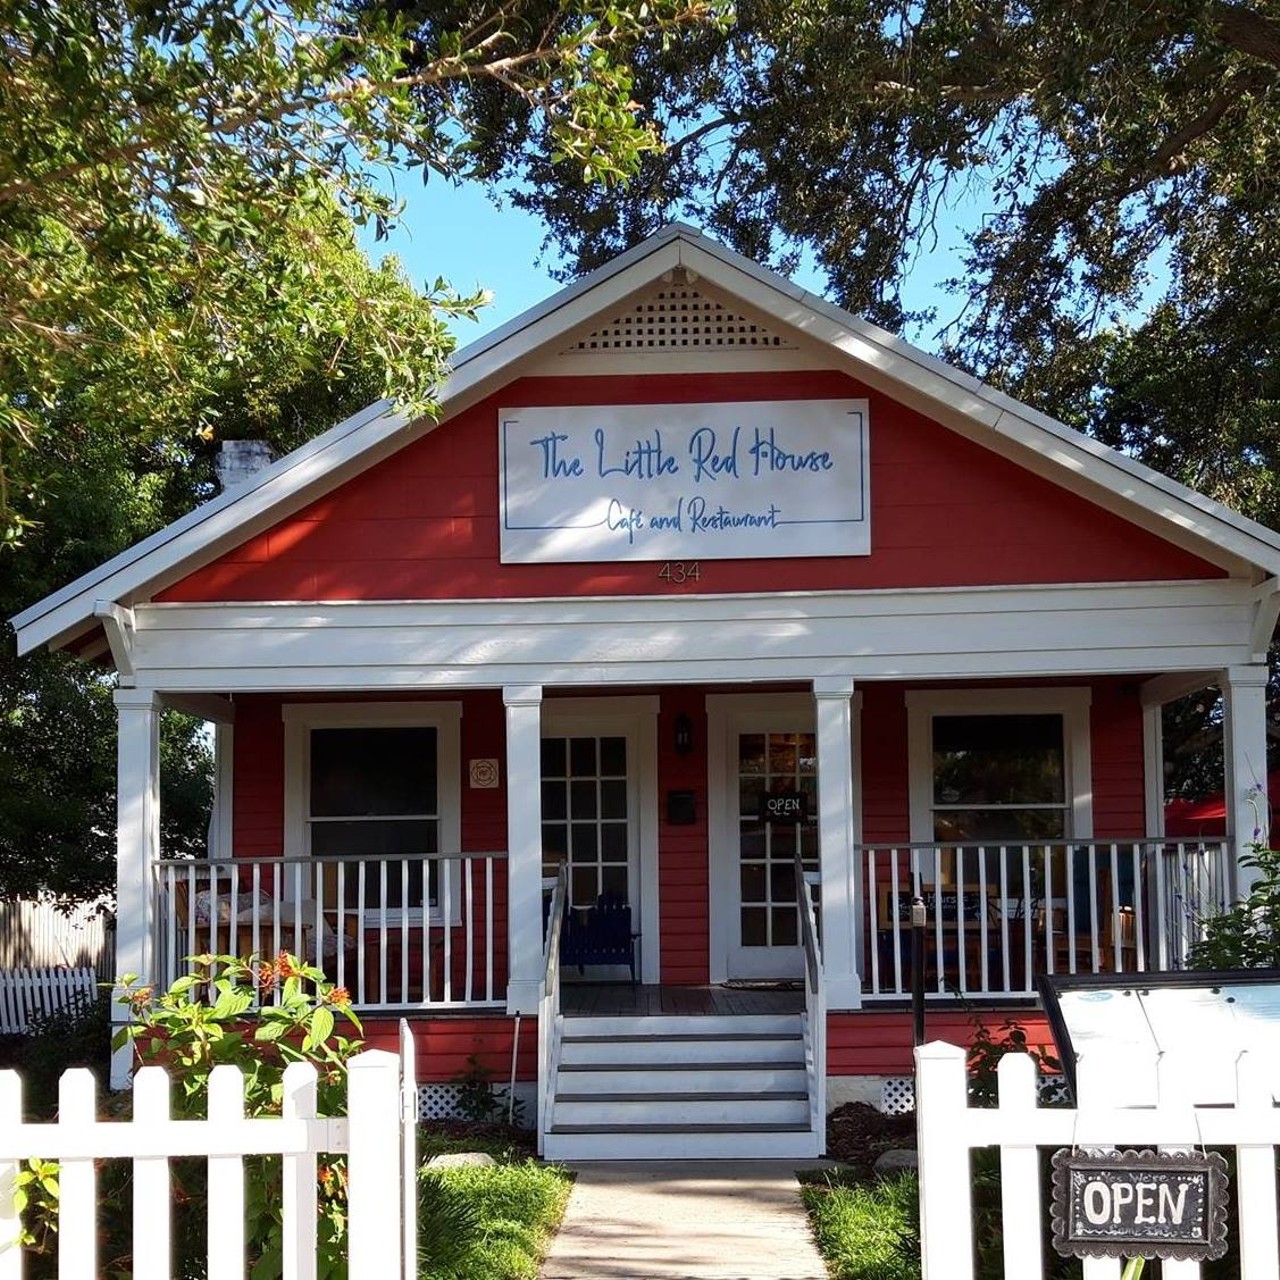  Little Red House 
13090 Gandy Blvd N, St. Petersburg, FL 33702, (727) 317-5751
Yes, it&#146;s as cute as it sounds. Little Red House is known for its French-American brunches and bakery, but it also has a lounge chairs perfect for sipping wine in, a canopy to relax under, and a sandbox for the kiddos to play in (and not bother your relaxation).  
Photo via Little Red House/Facebook